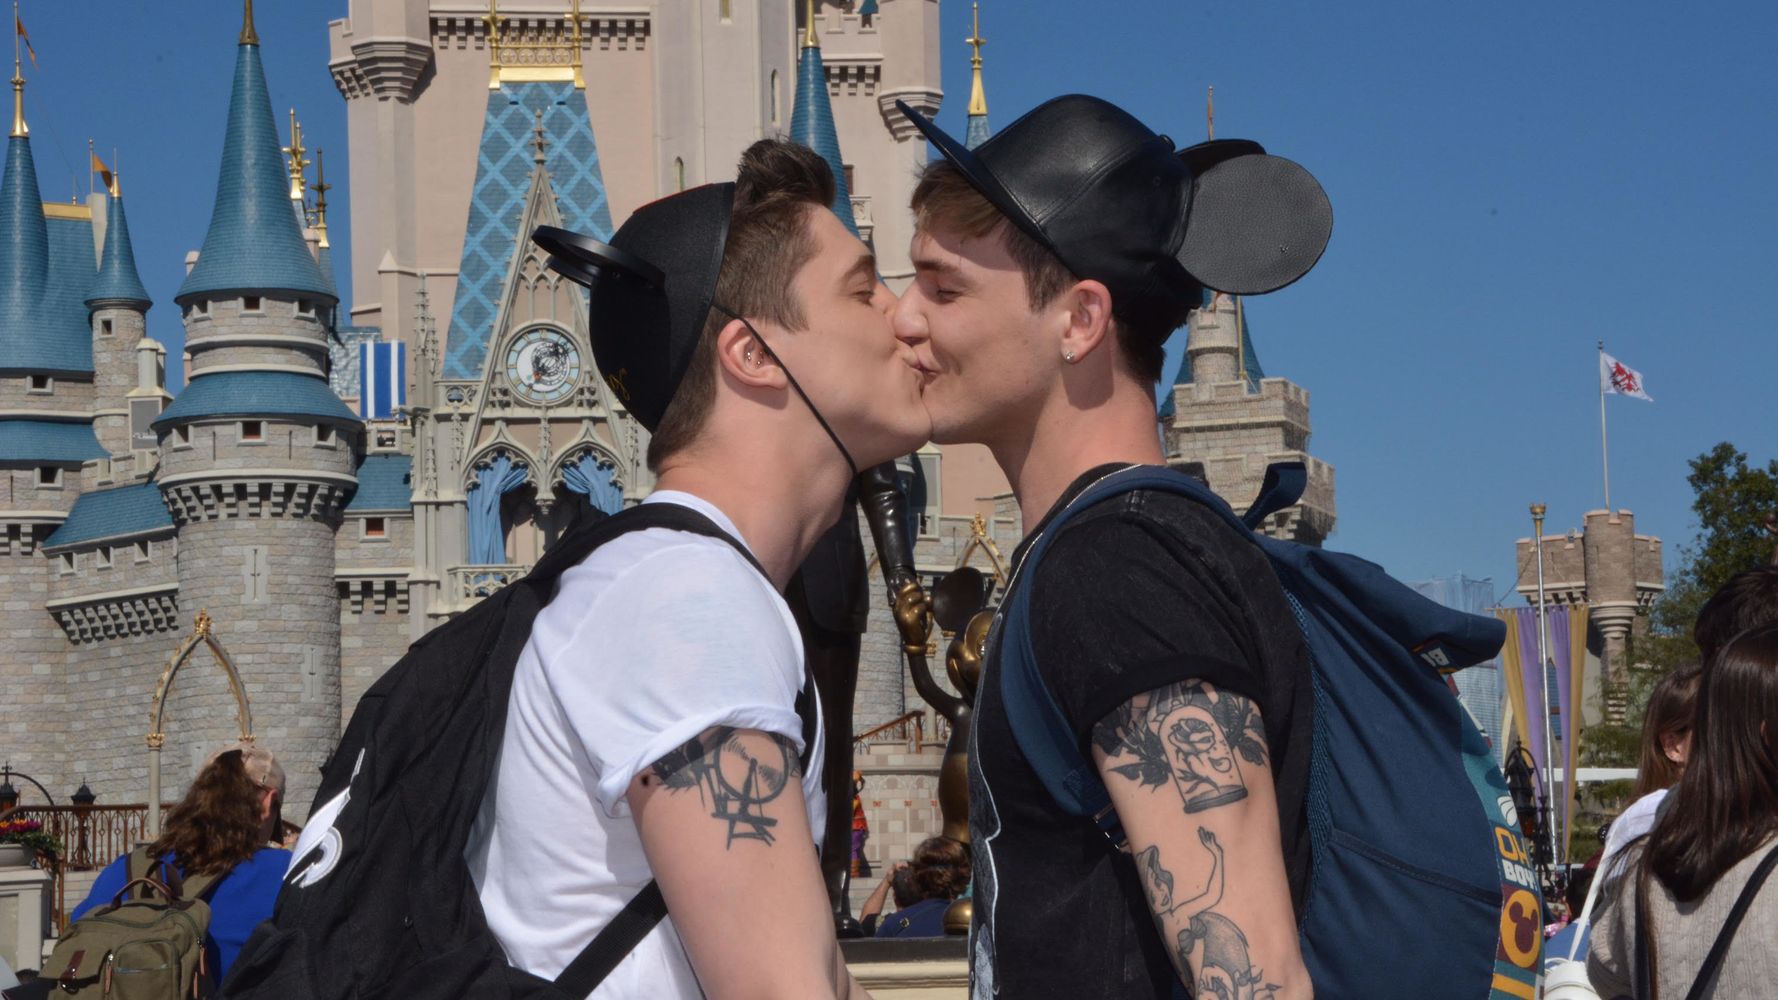 This Couple's Disney World Proposal Is A Fairy Tale Come True.